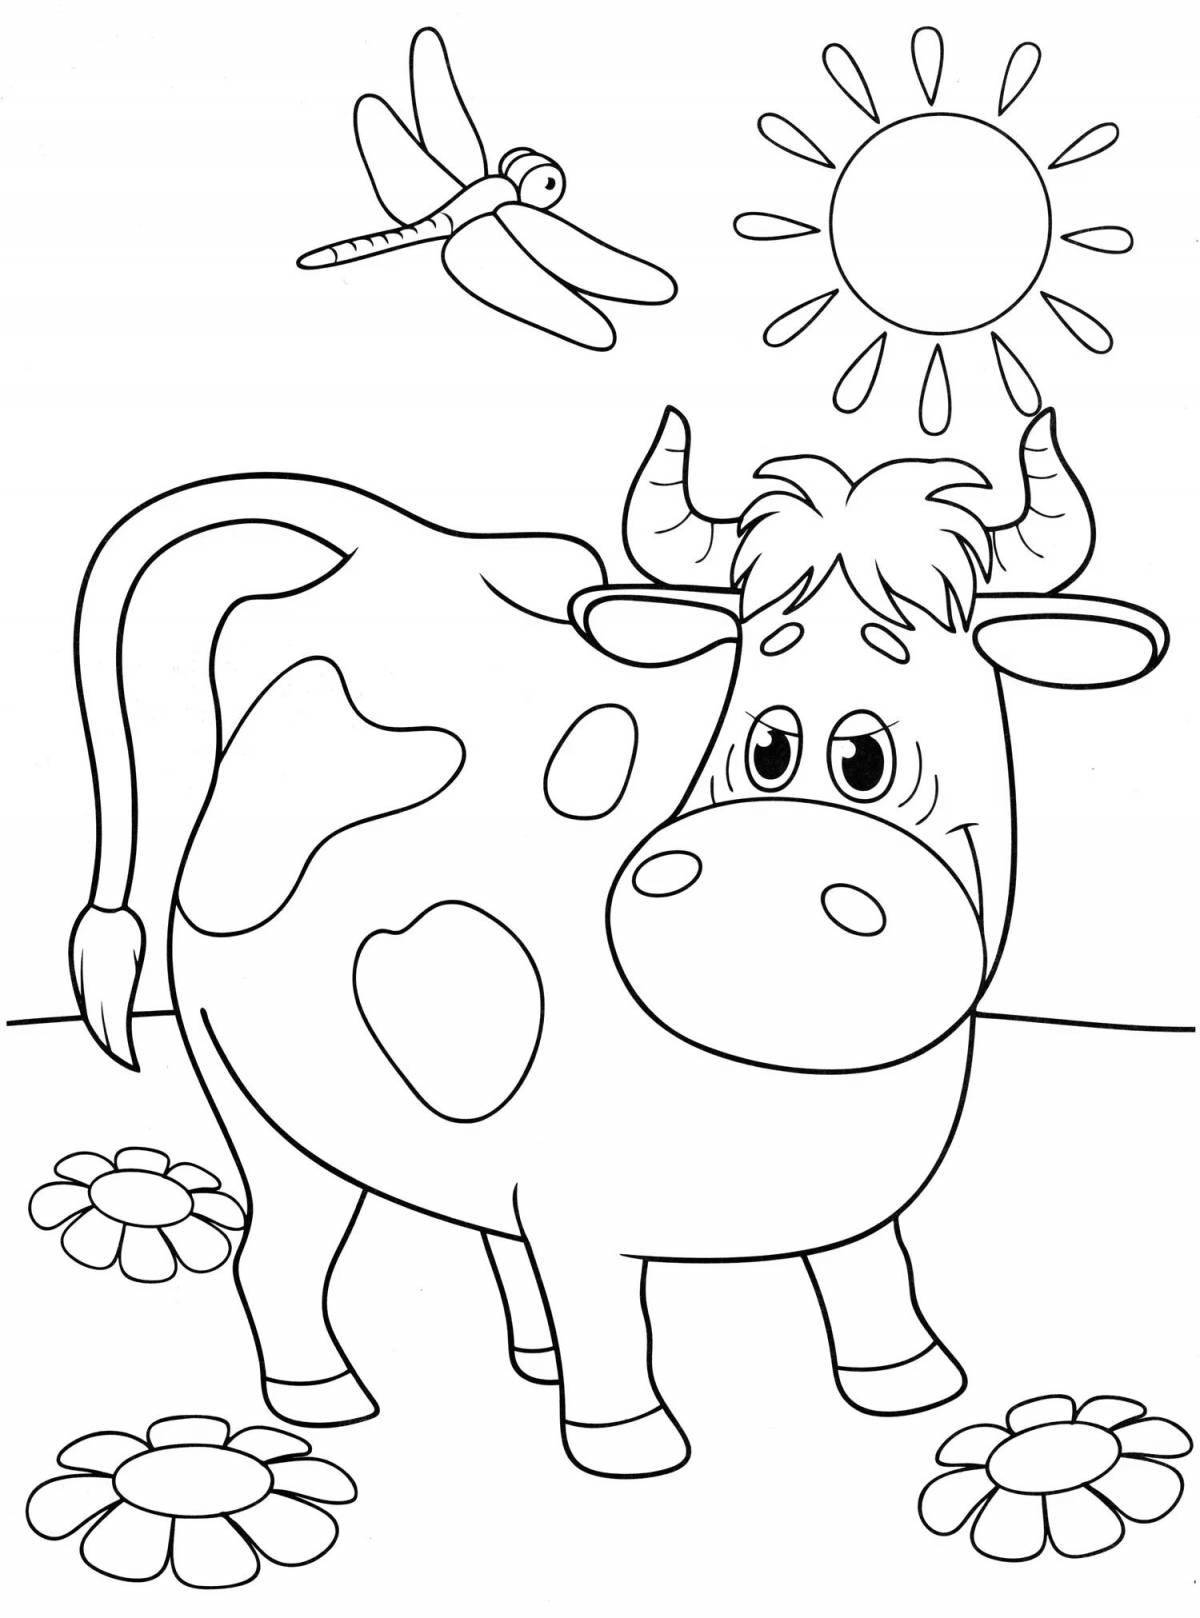 Magical drawing of a cow for kids